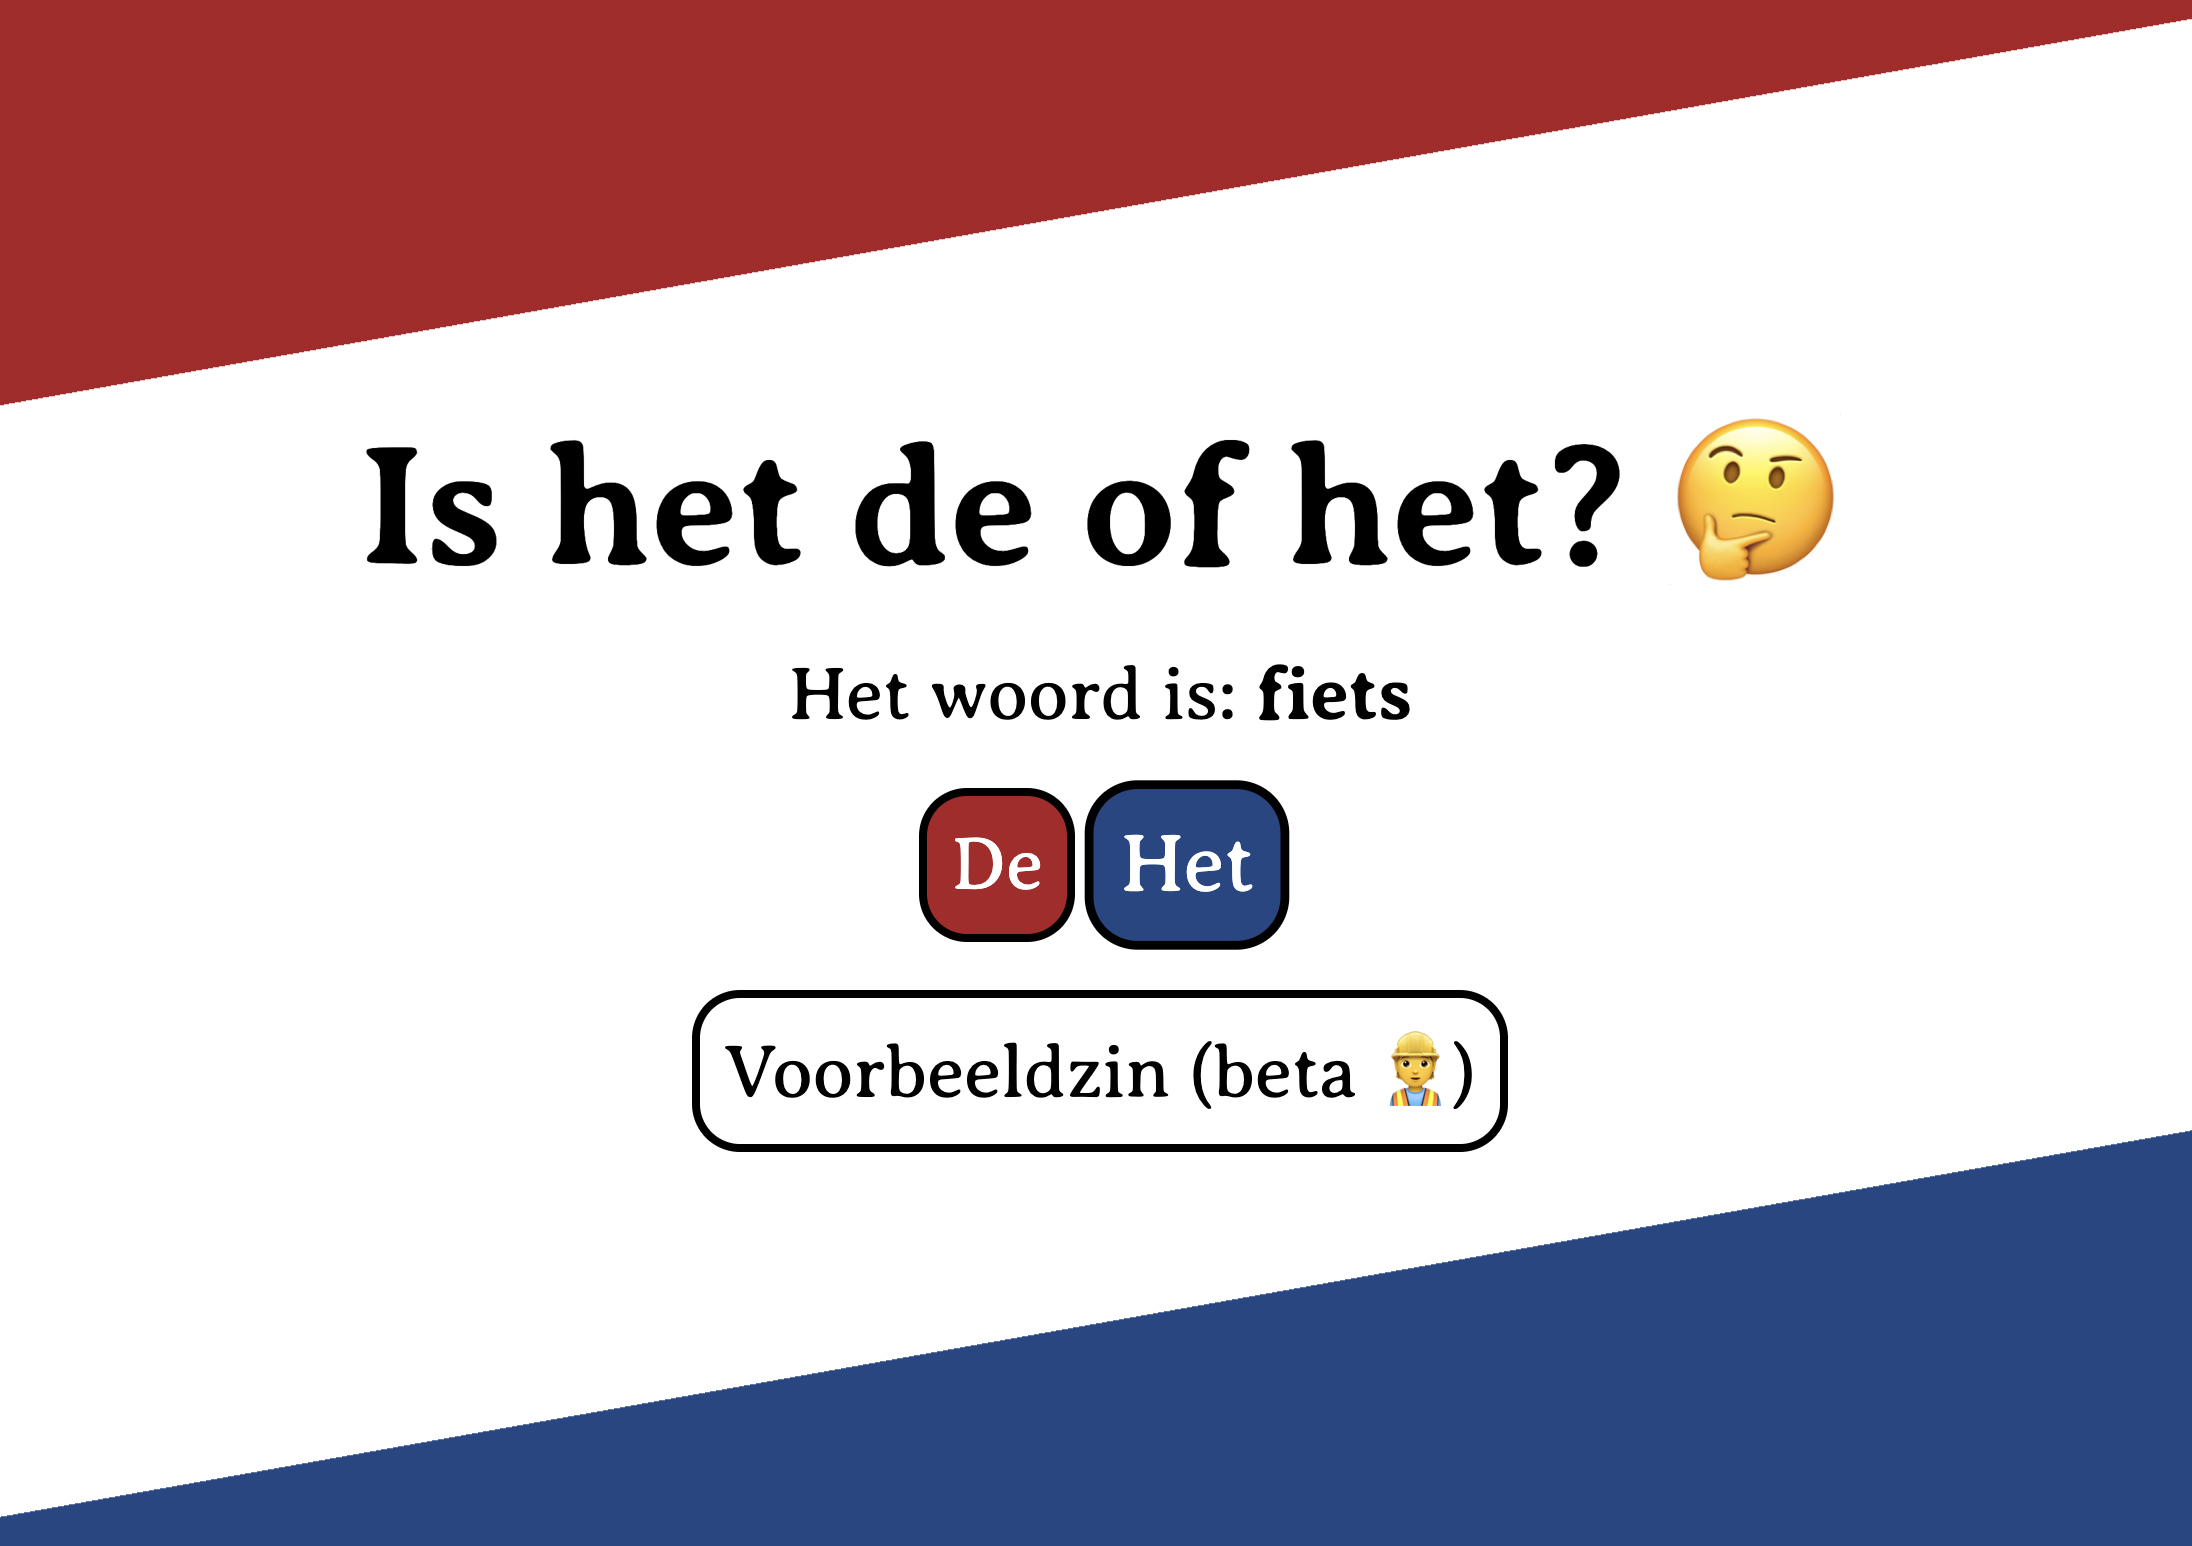 A screenshot of the ishetdeofhet.nl landing page, asking if the word 'fiets' is a 'de' or 'het' word